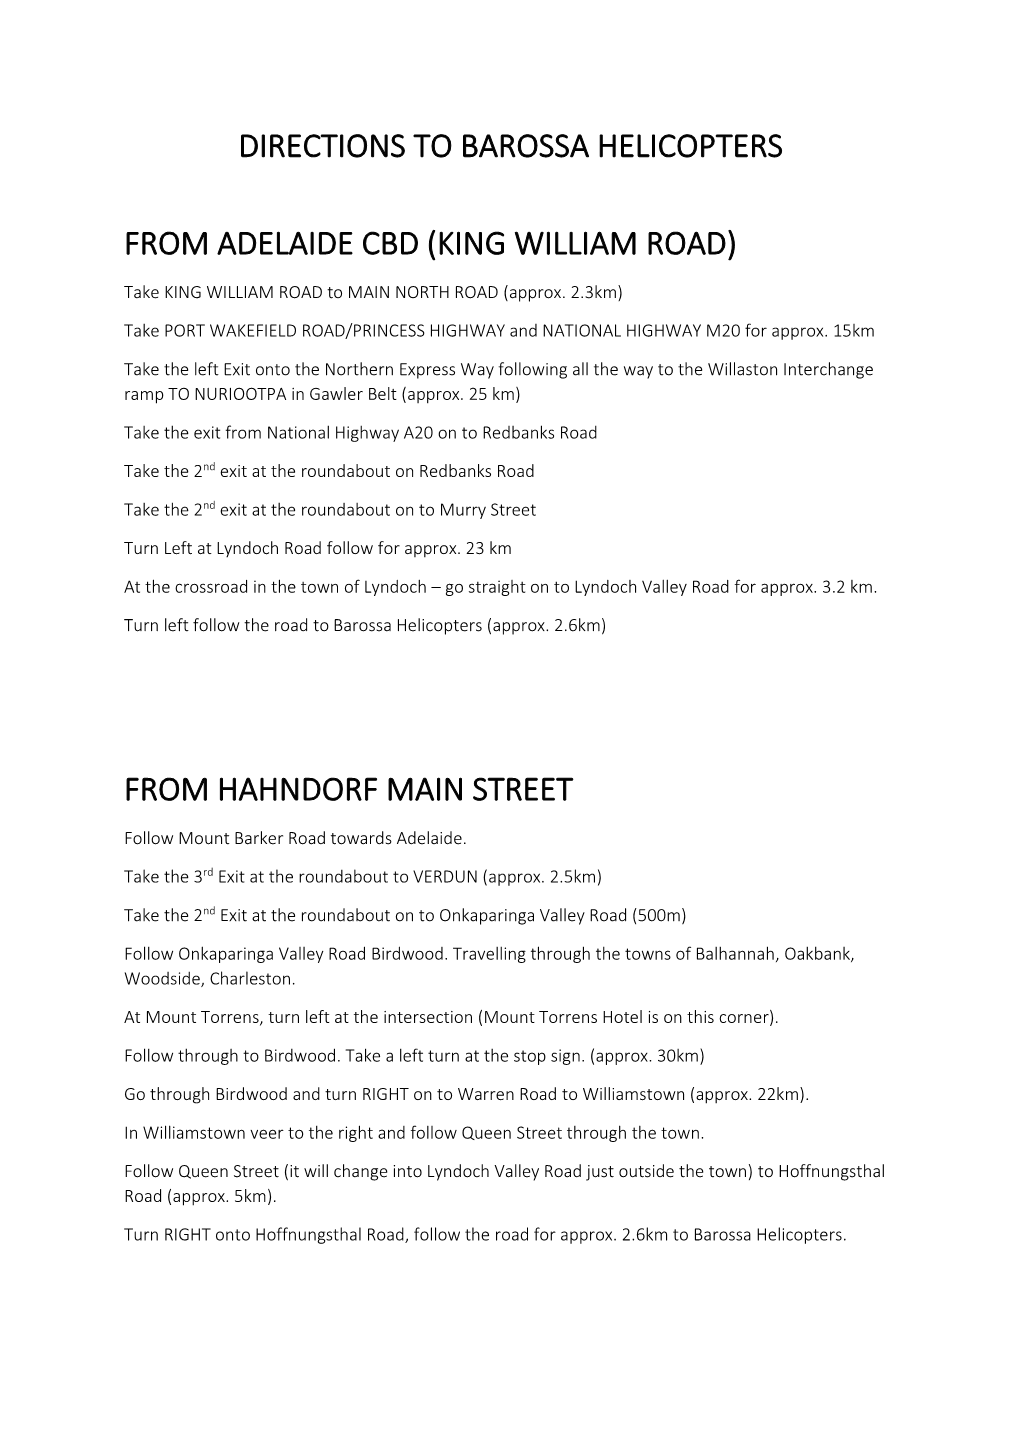 Directions to Barossa Helicopters from Adelaide Cbd (King William Road)